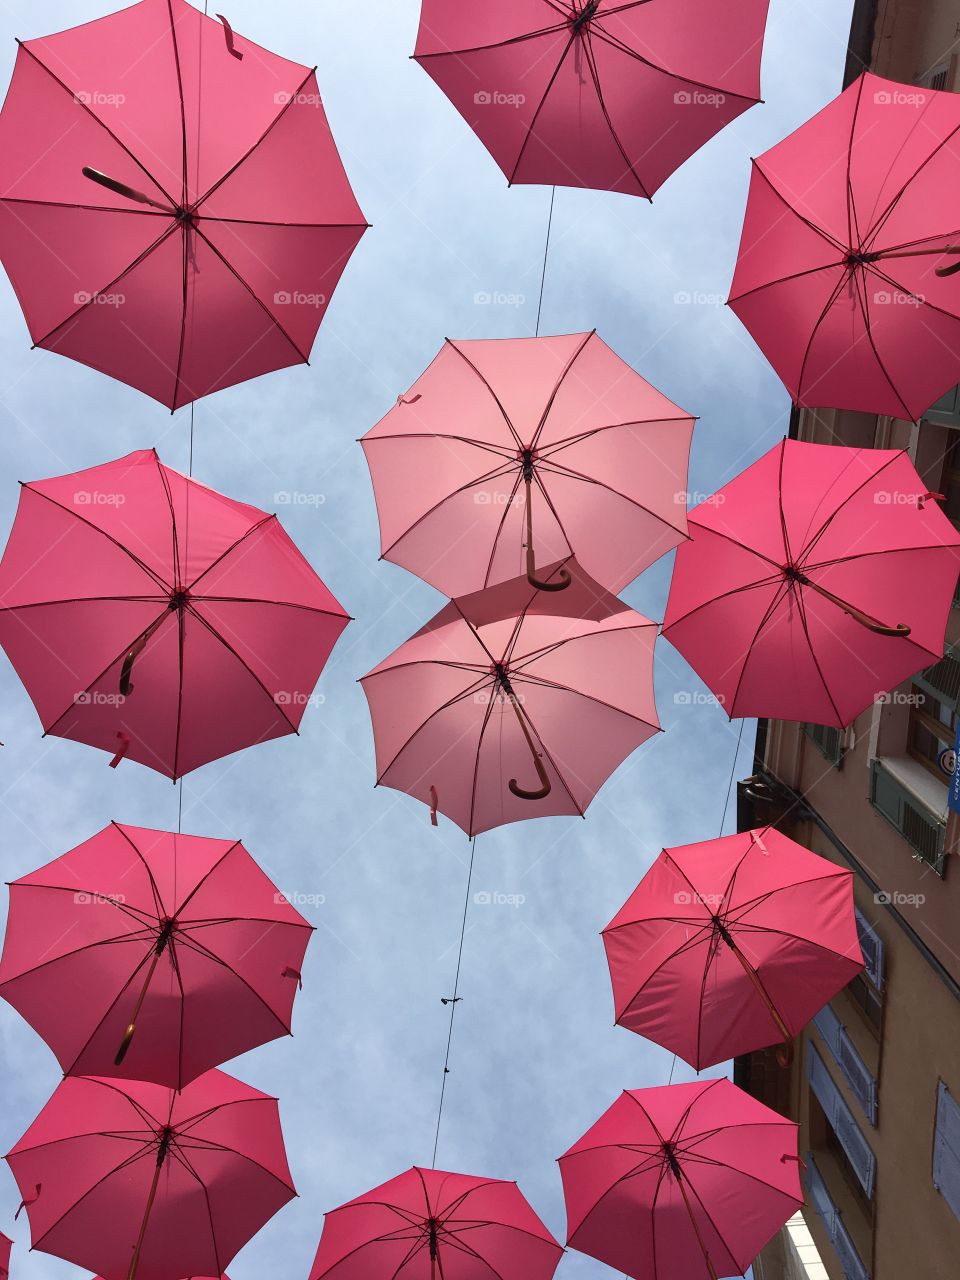 Pinky decorative umbrellas, not really in right order